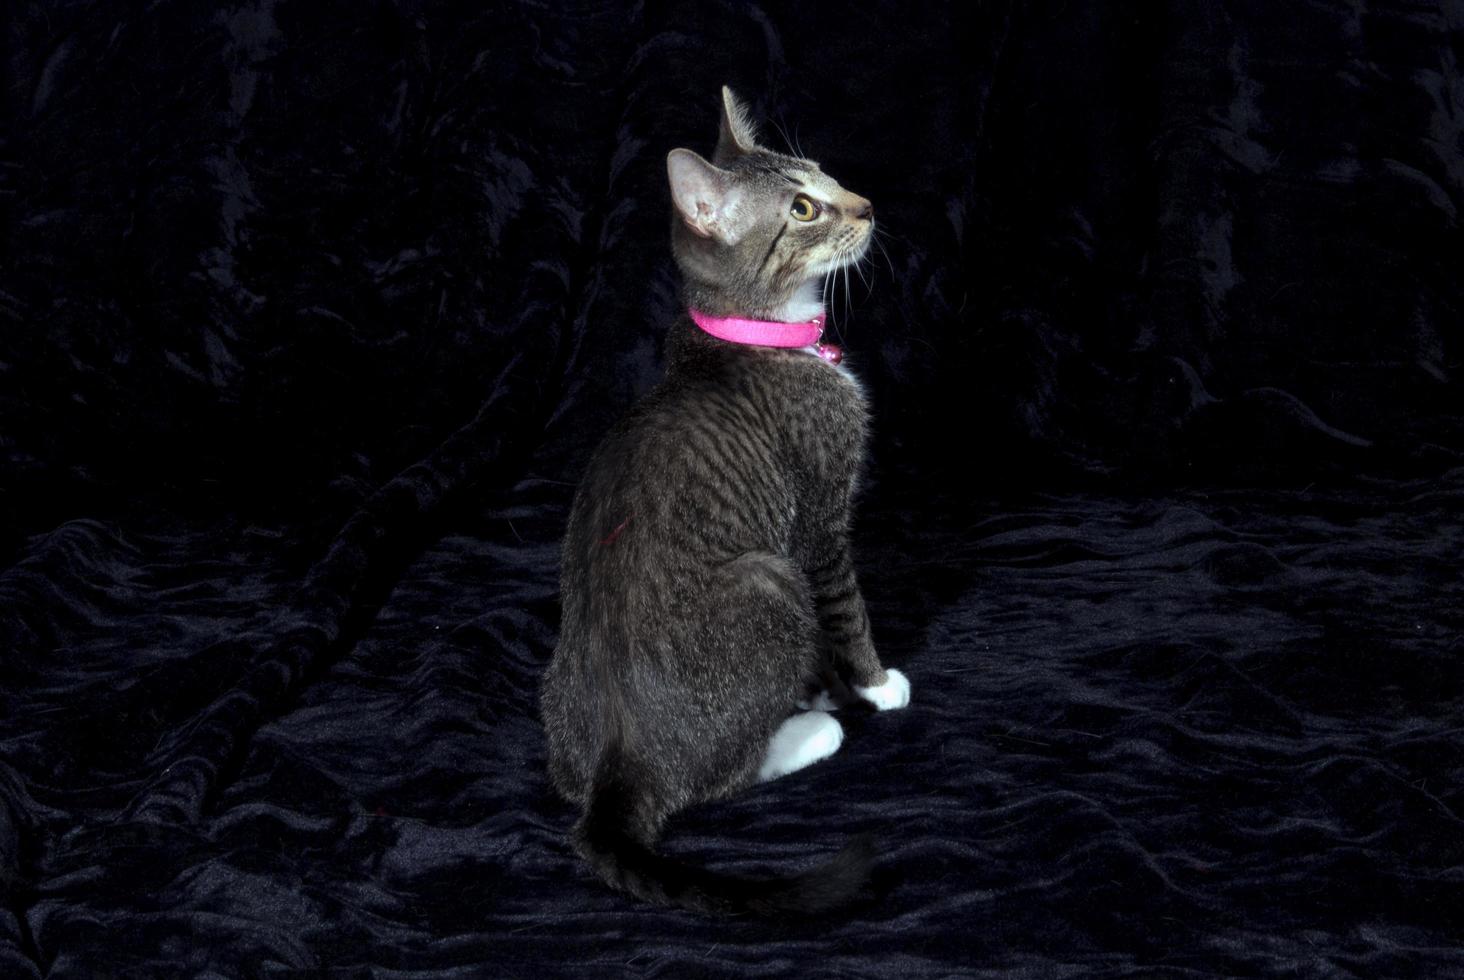 A Gray tabby cat with a pink collar and white paws on a black background photo